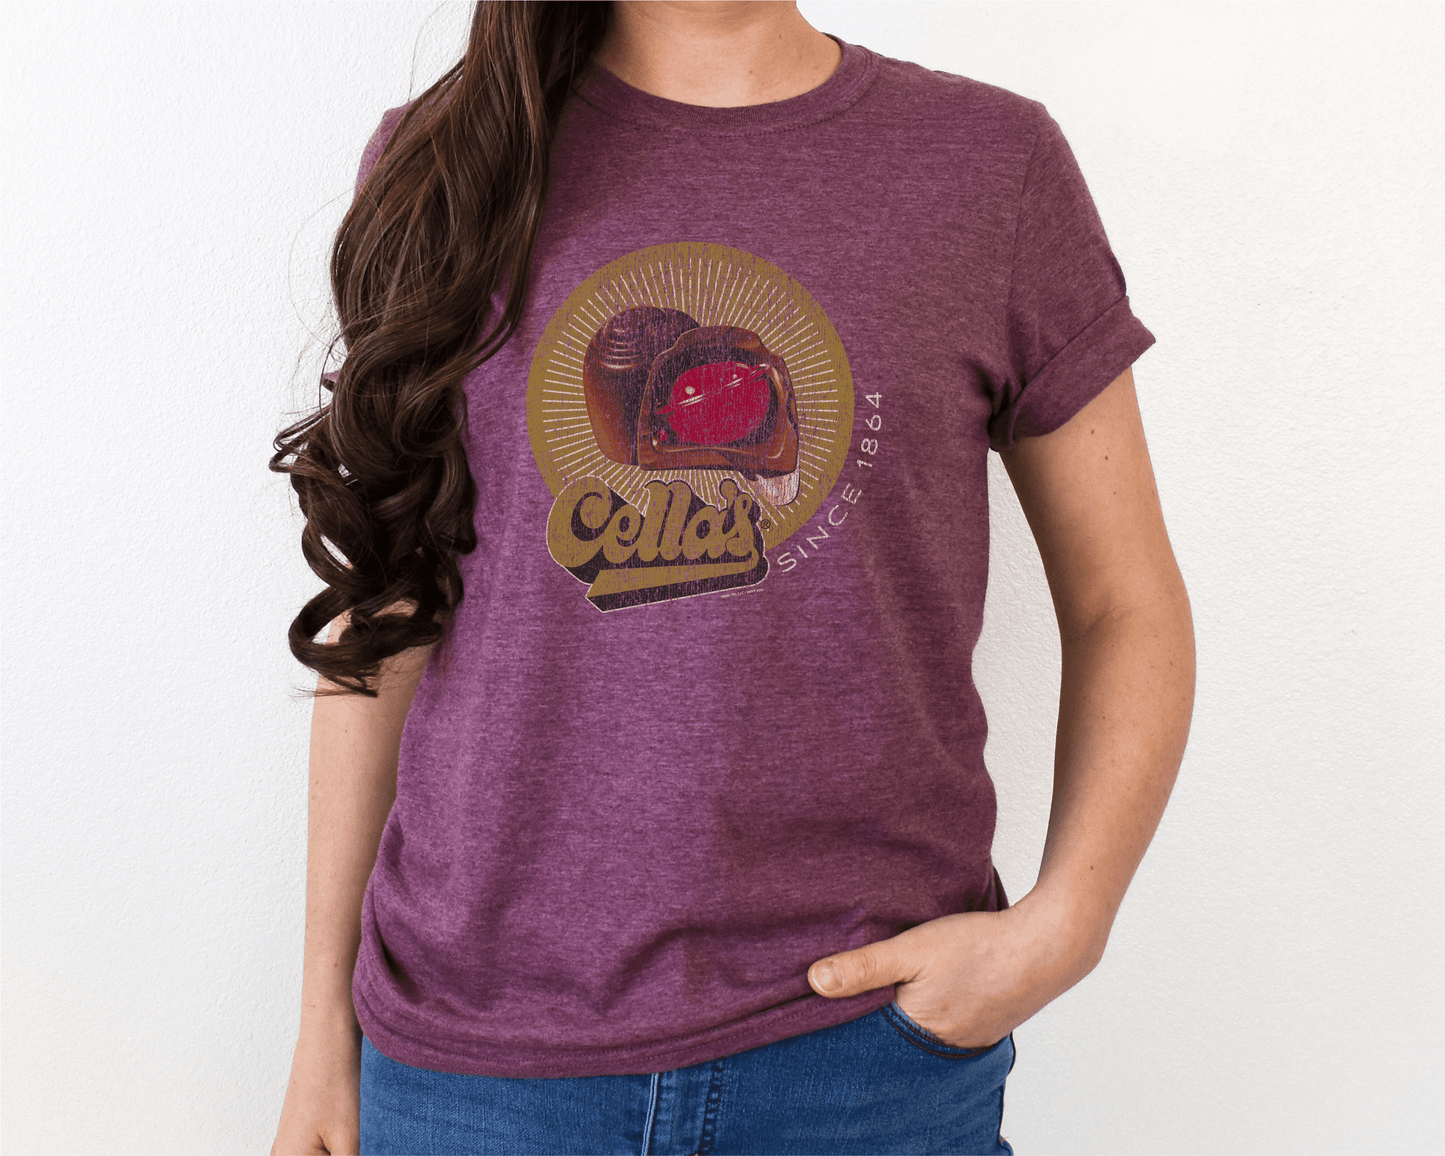 Cella's® Chocolate Covered Cherries Tee | Vintage Candy Shirt